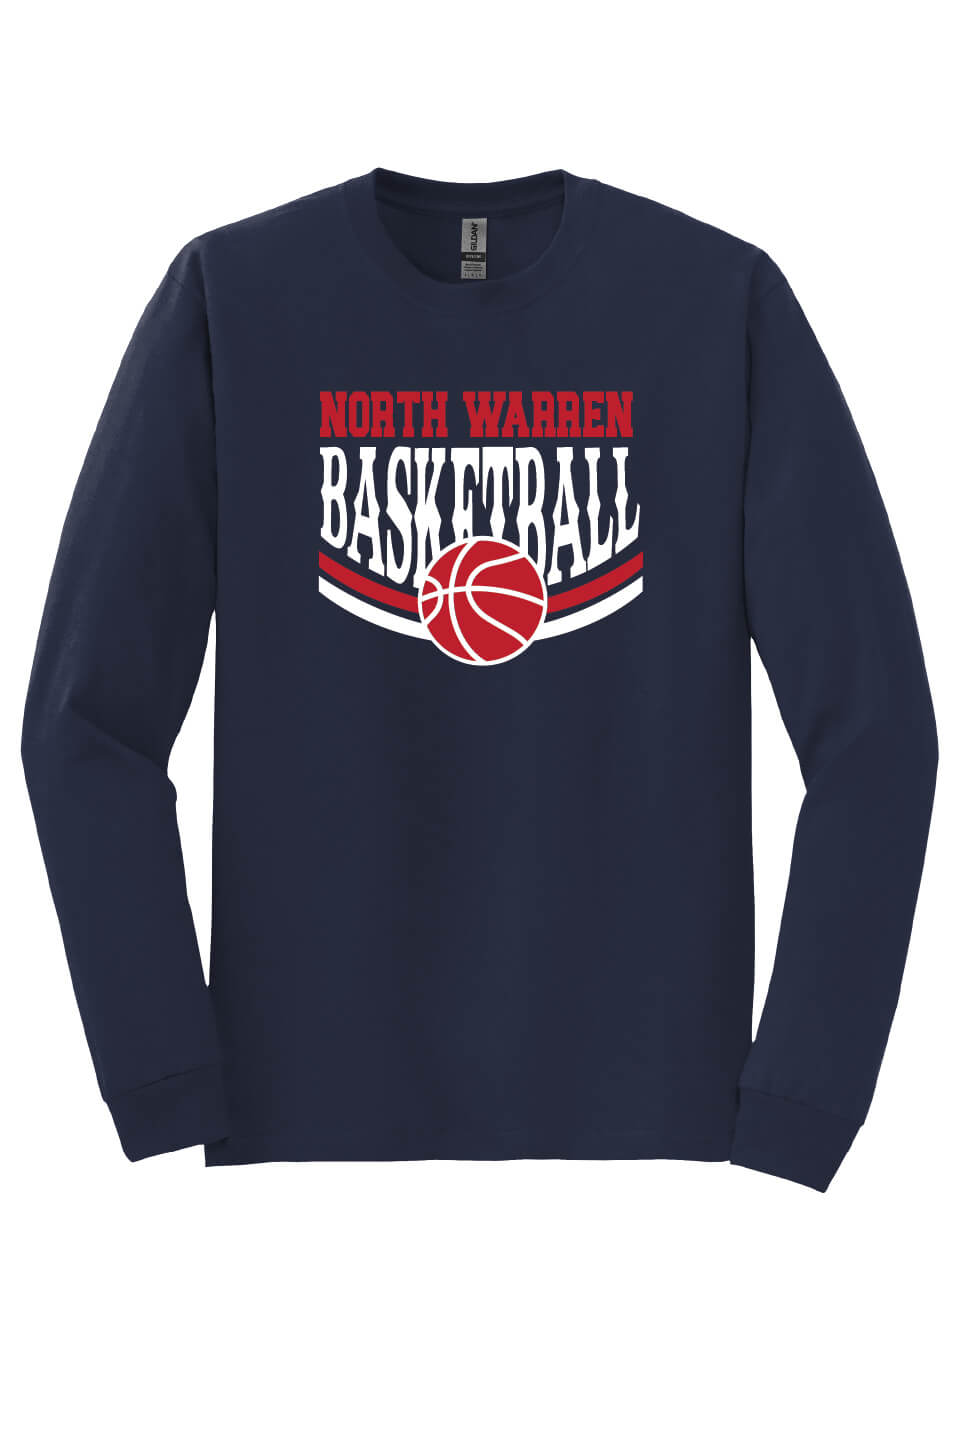 NW Basketball Long Sleeve T-Shirt (Youth) naby